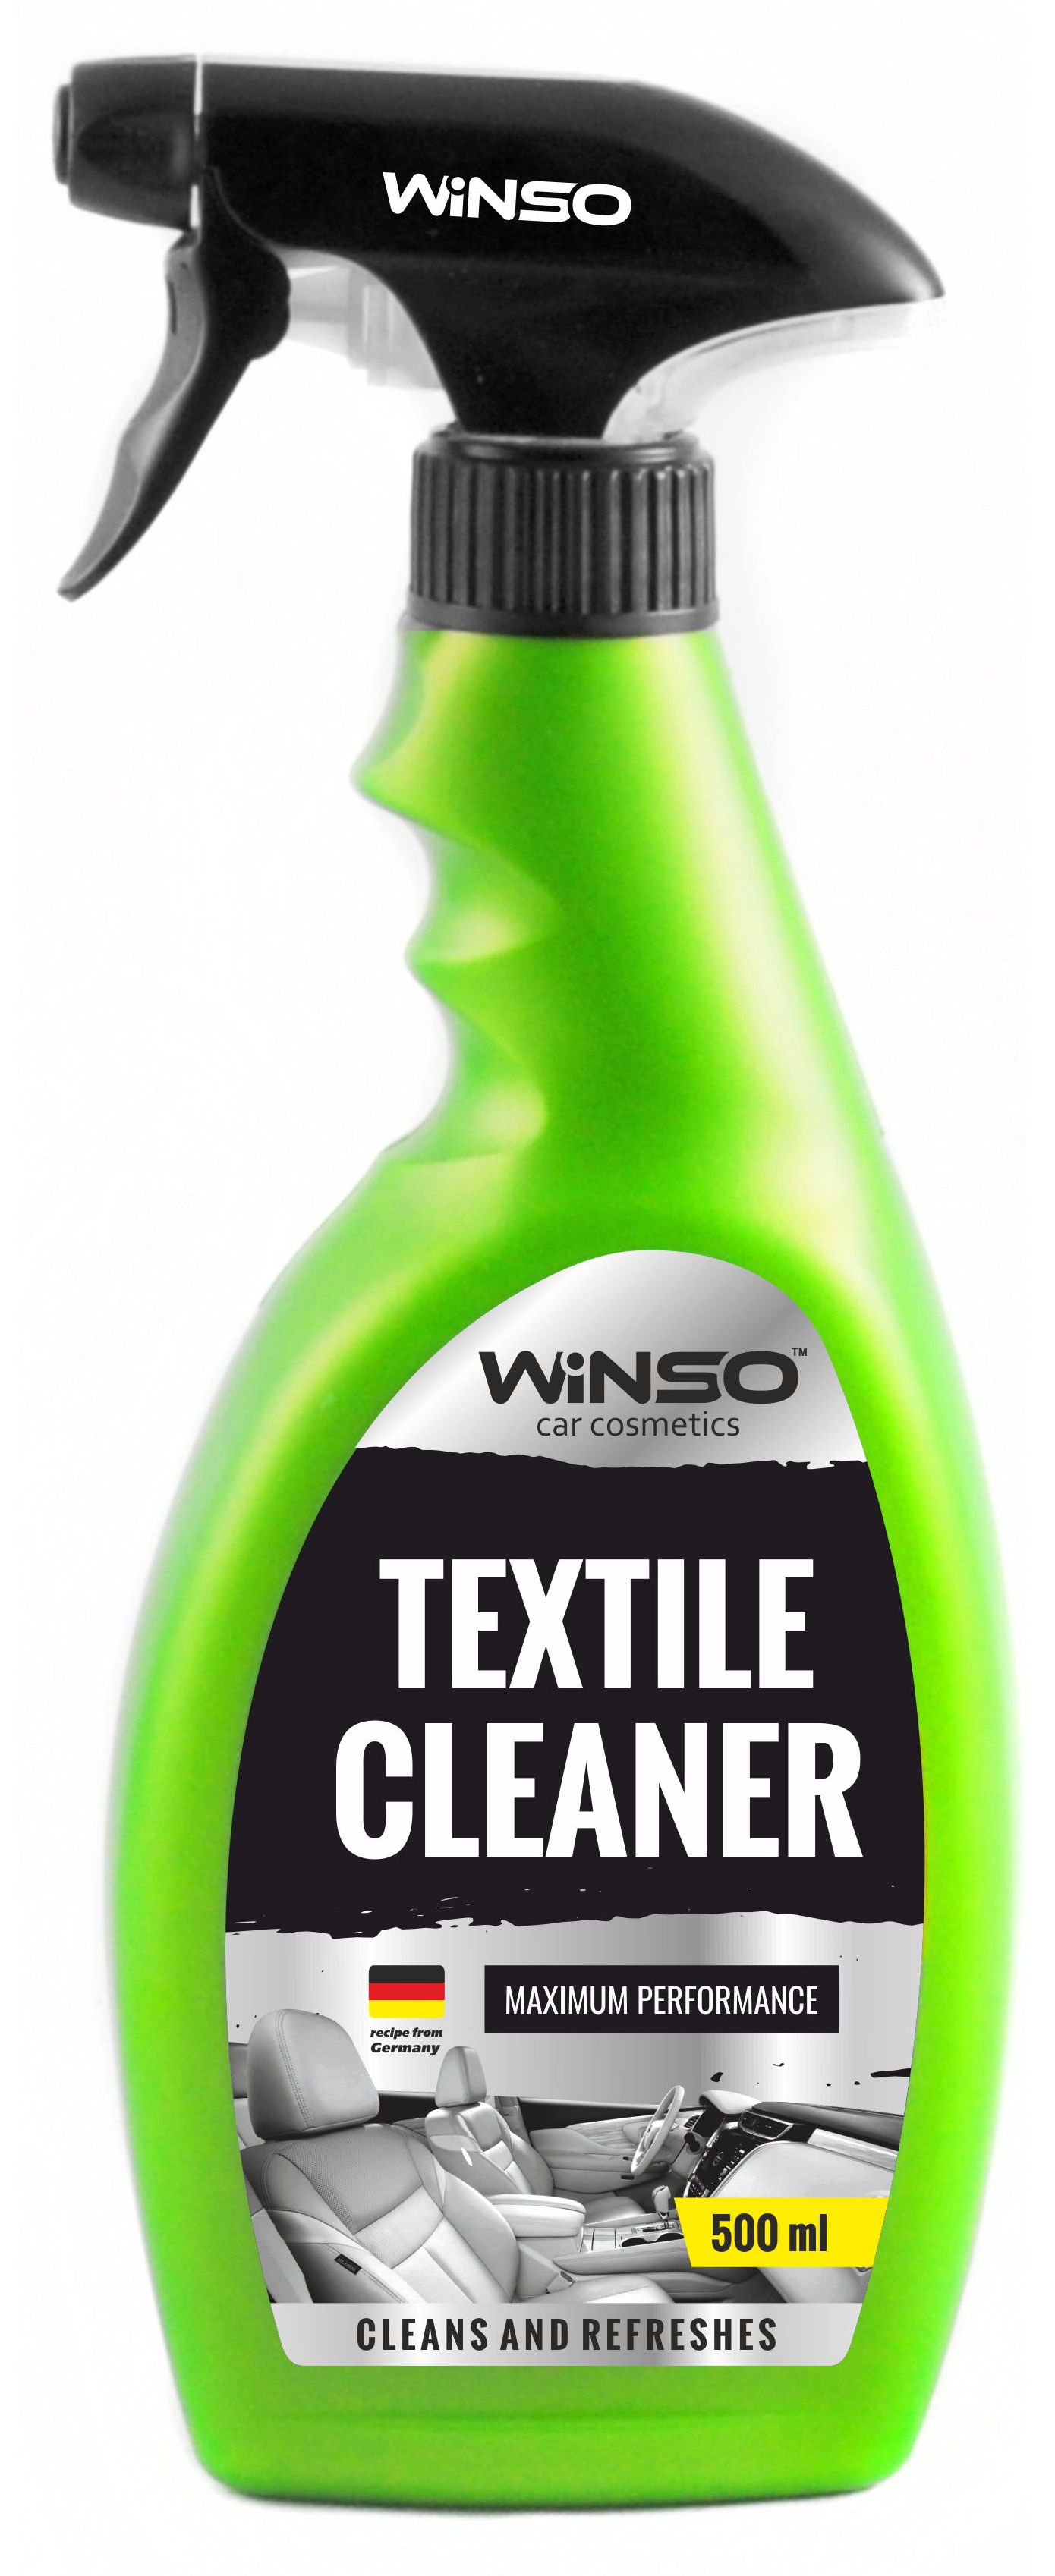 Textile cleaner, 500ml Winso 810570